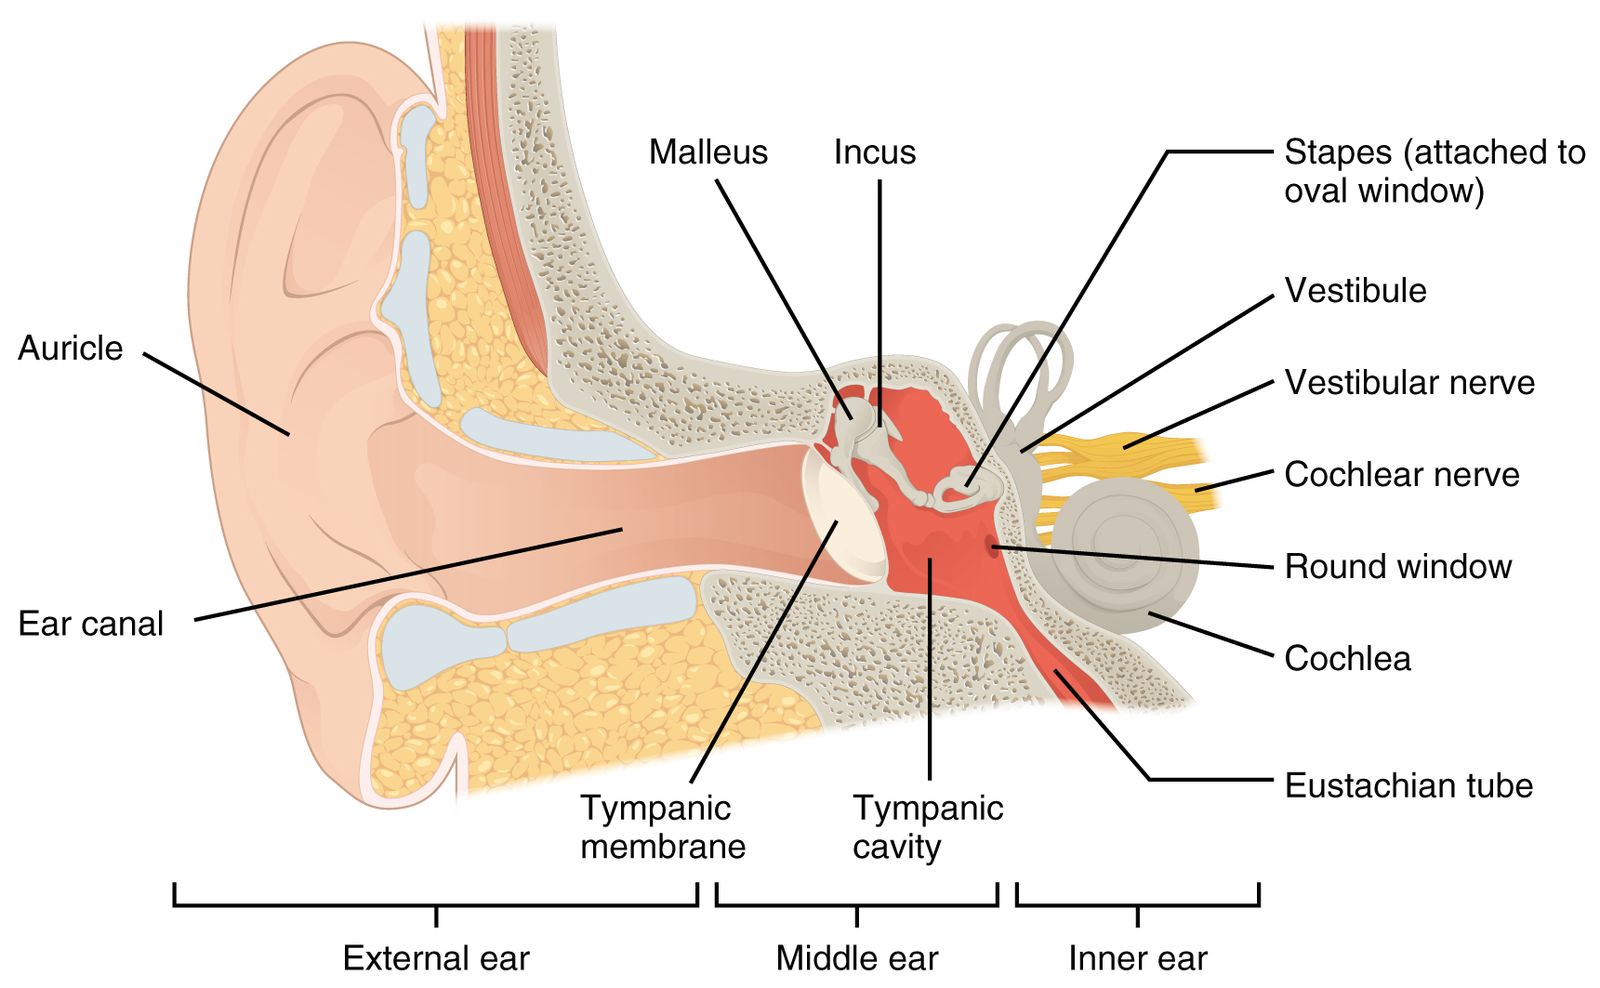 the tube that connects the middle and inner ear